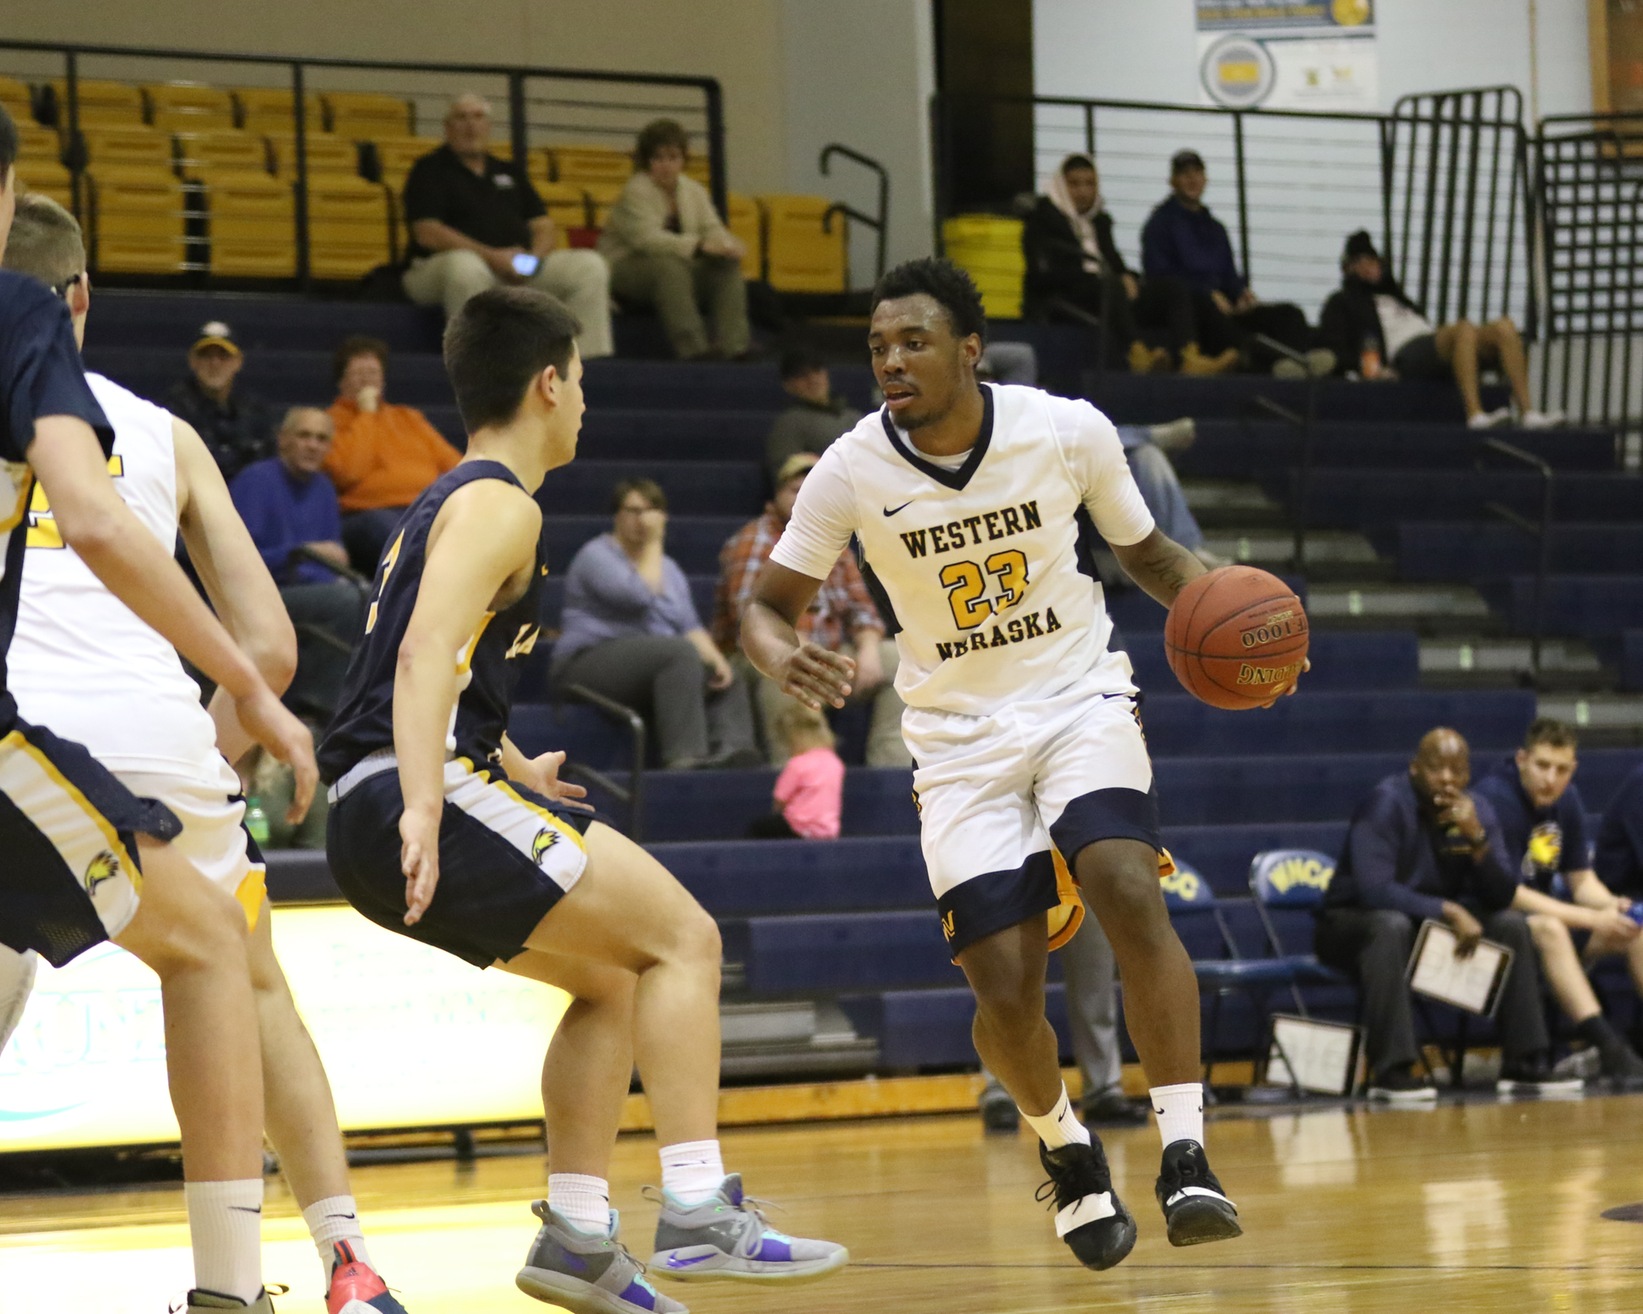 WNCC falls to LCCC on a buzzer-beater